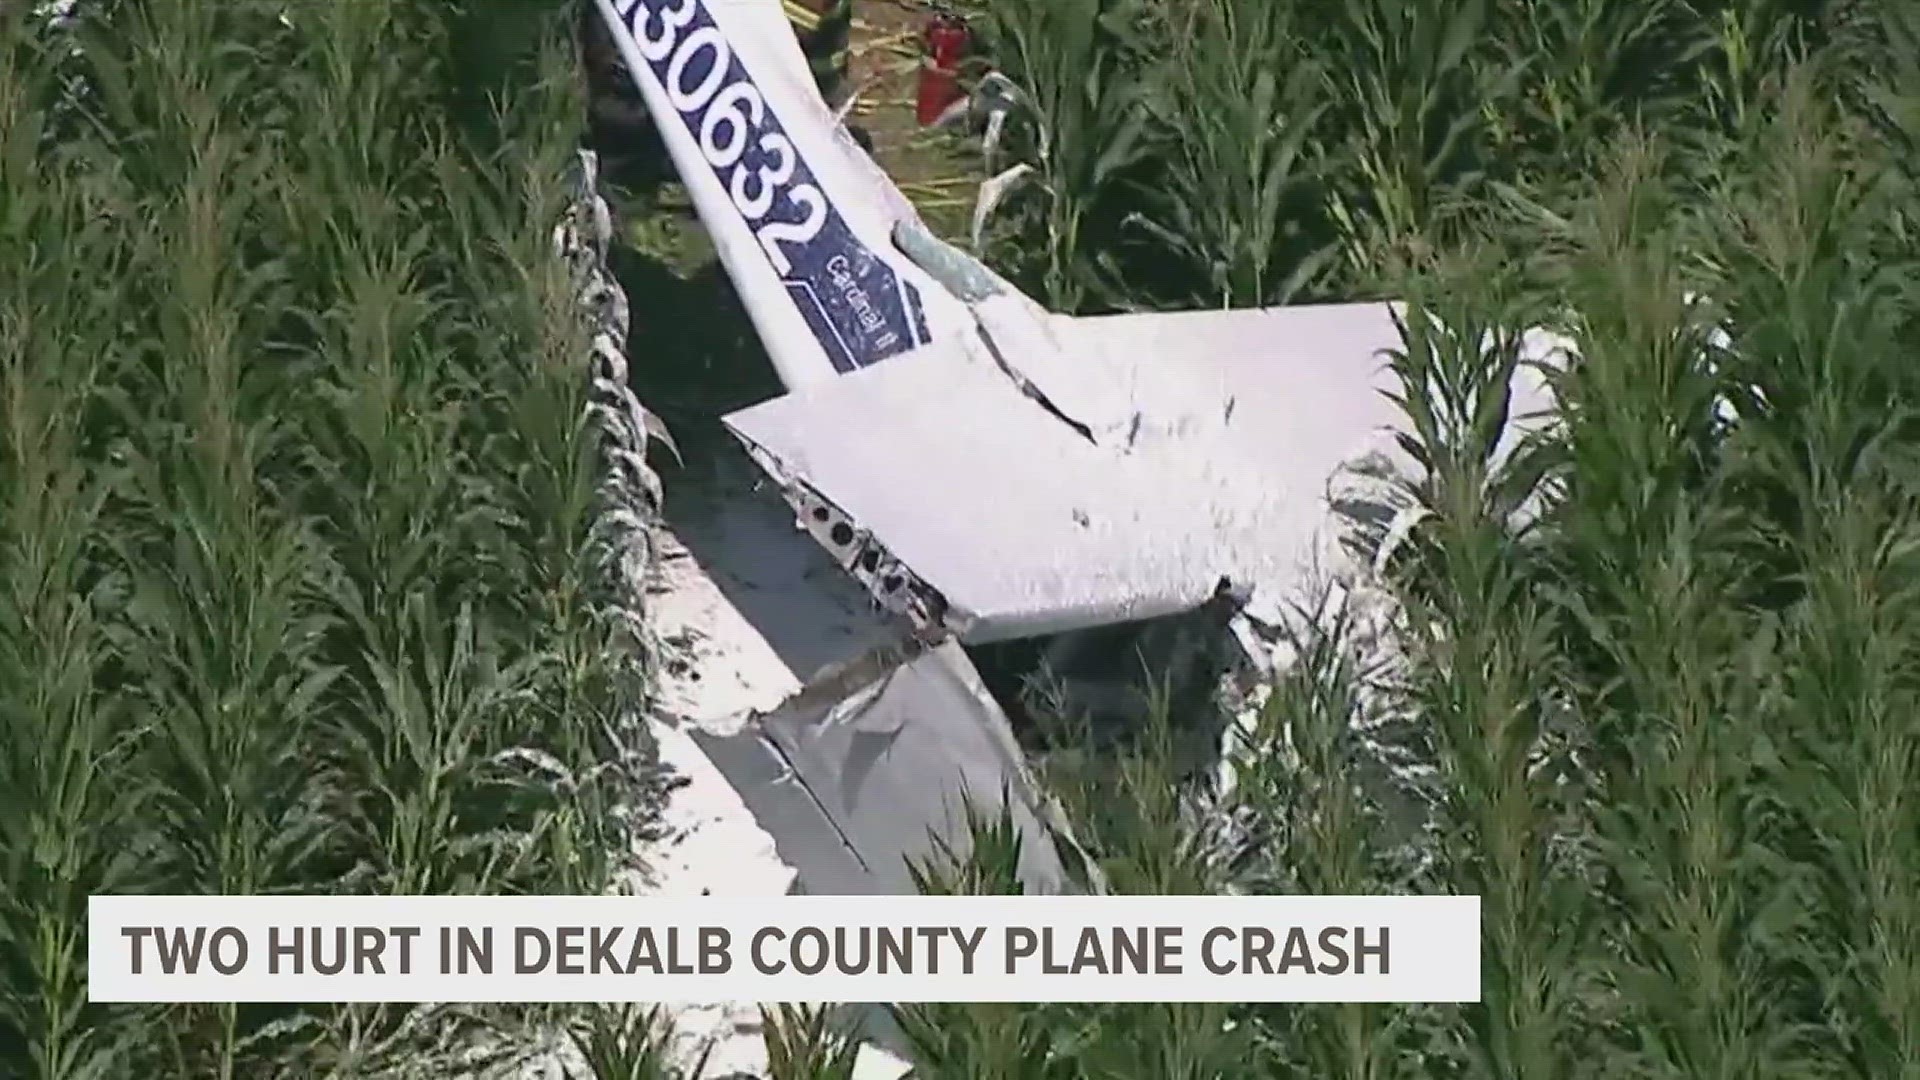 The plane sustained heavy front-end damage. The pilot and passenger were taken to a hospital for treatment.